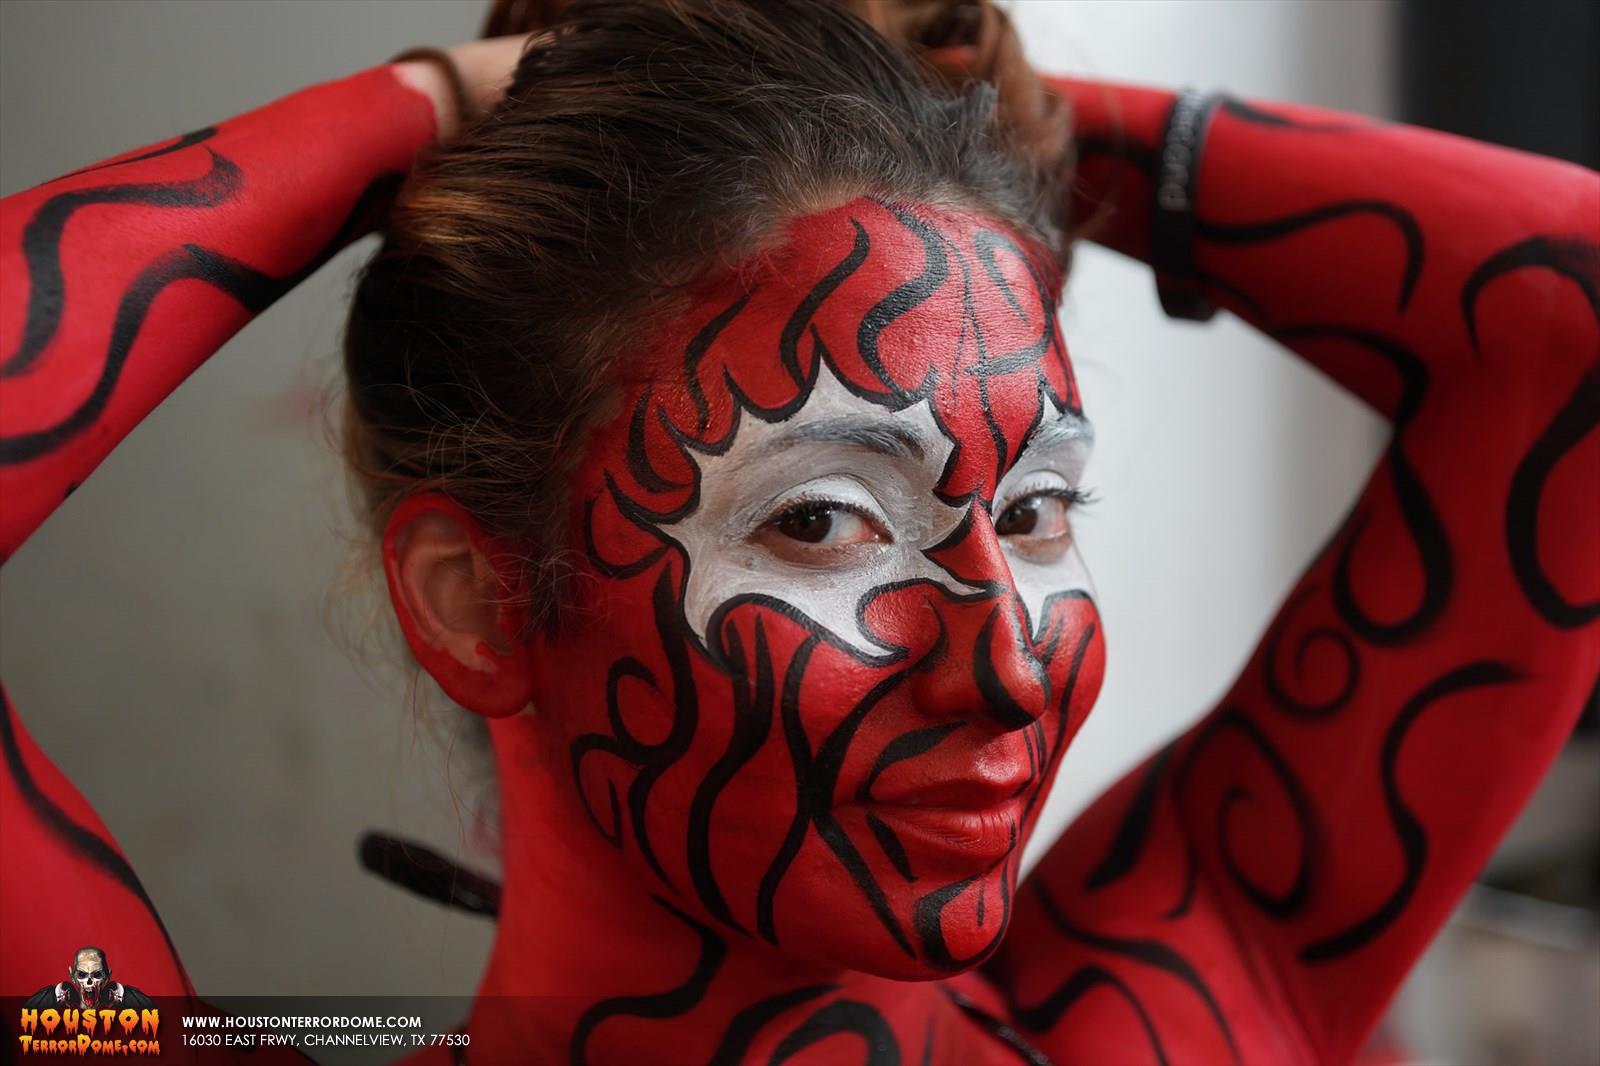 Check out that awesome detail on the face paint. 